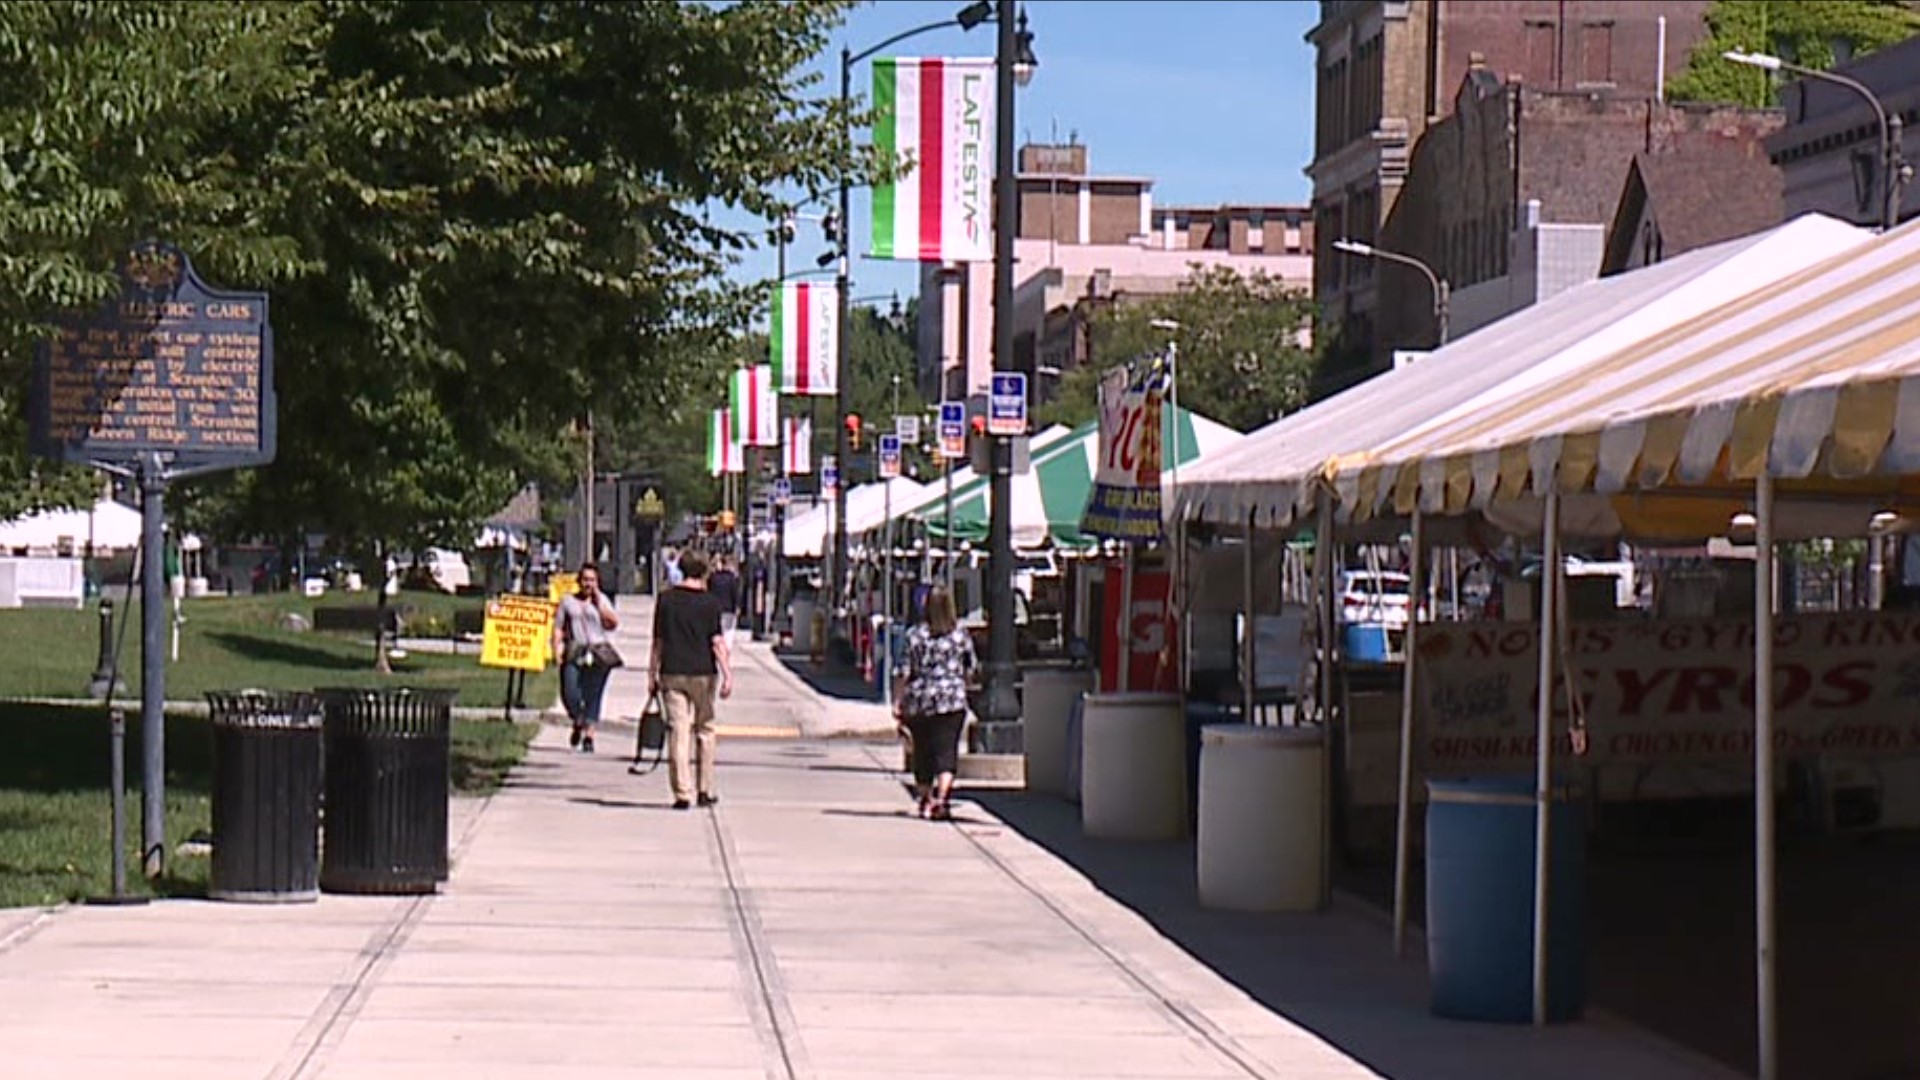 Downtown Scranton is the place for Italian food and fun